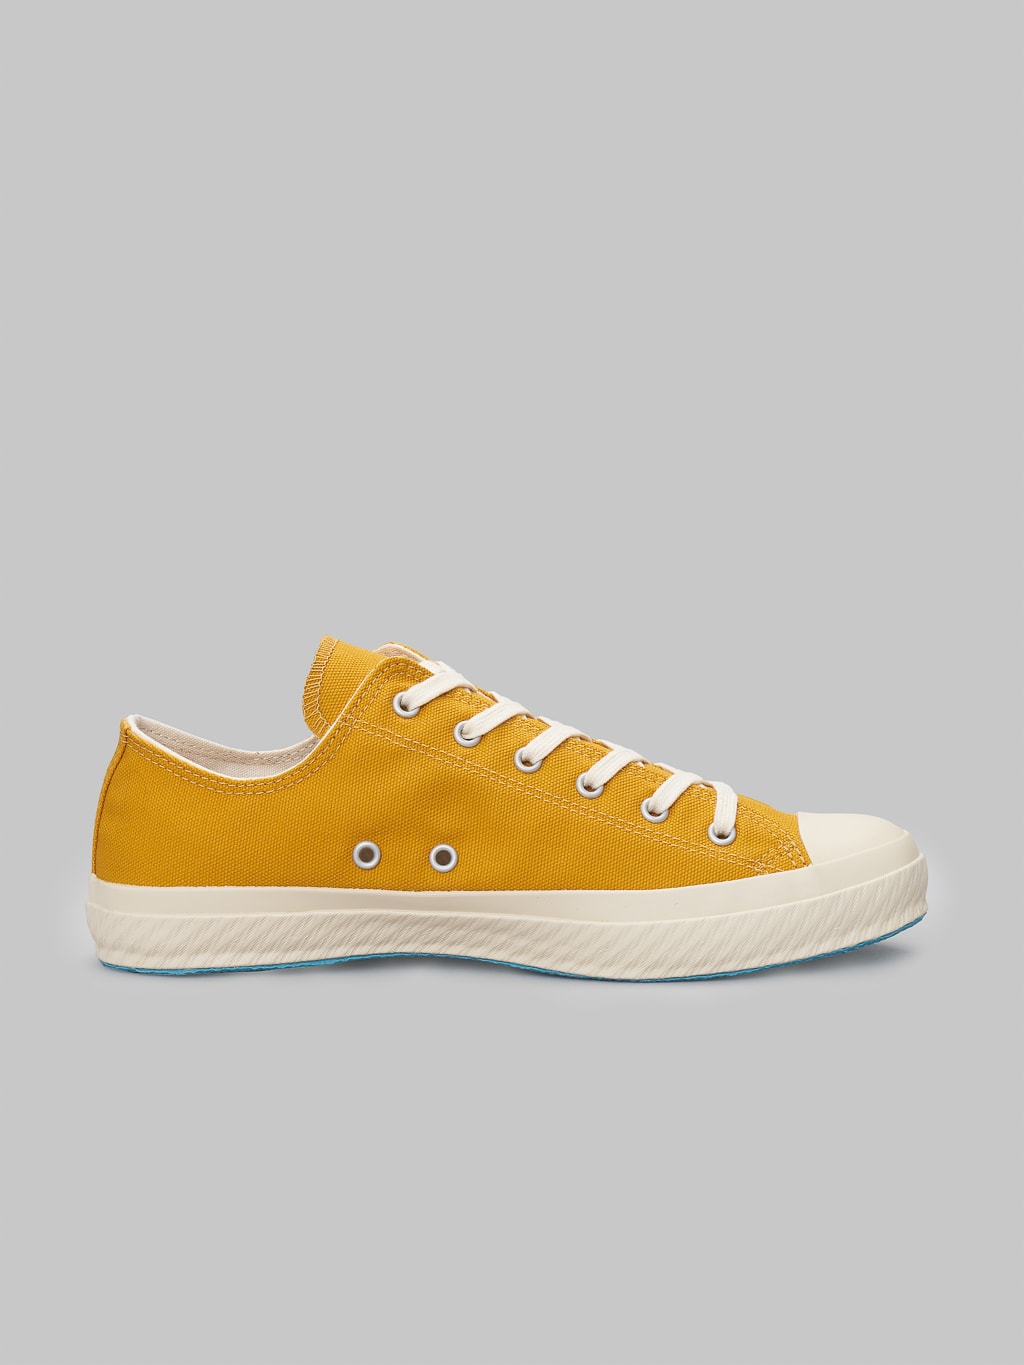 Shoes like pottery low mustard sneakers ventilation side holes